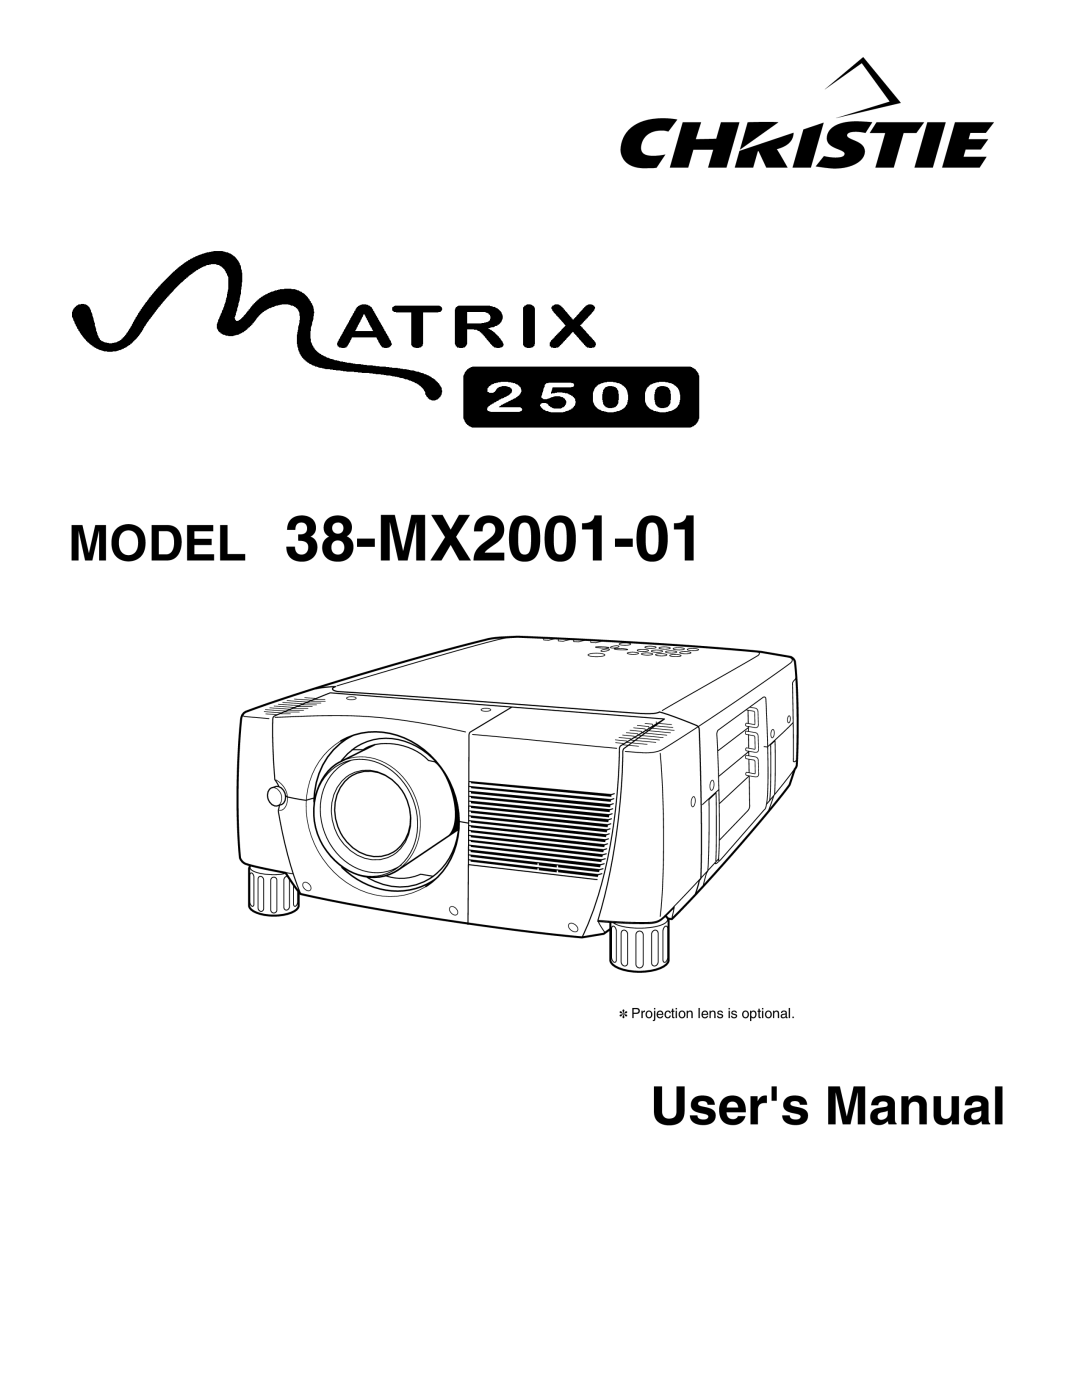 Christie Digital Systems user manual MODEL 38-MX2001-01, Users Manual, Projection lens is optional 